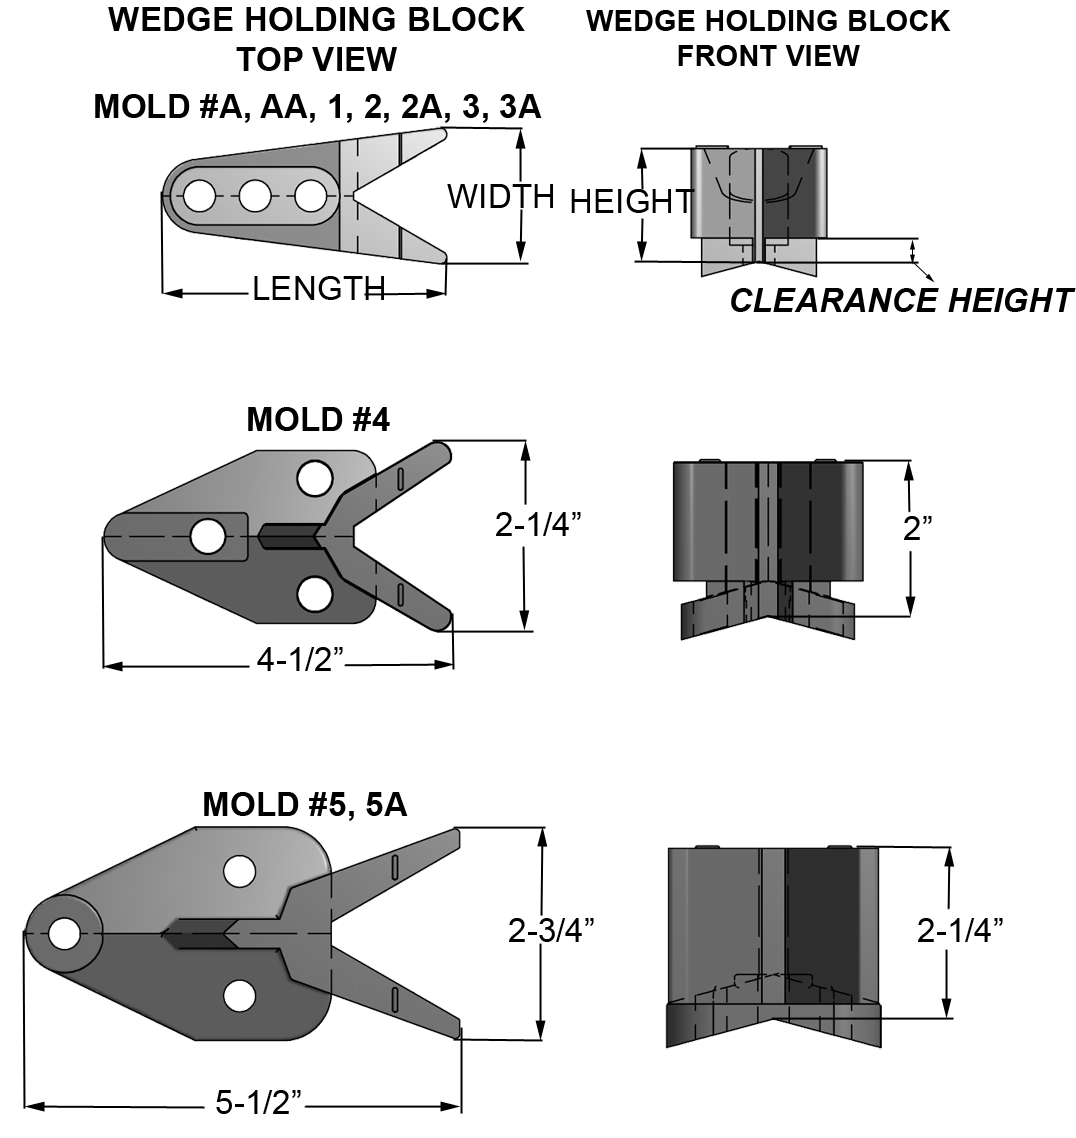 Fig.3 Wedge Holding Blocks Table and Diagram